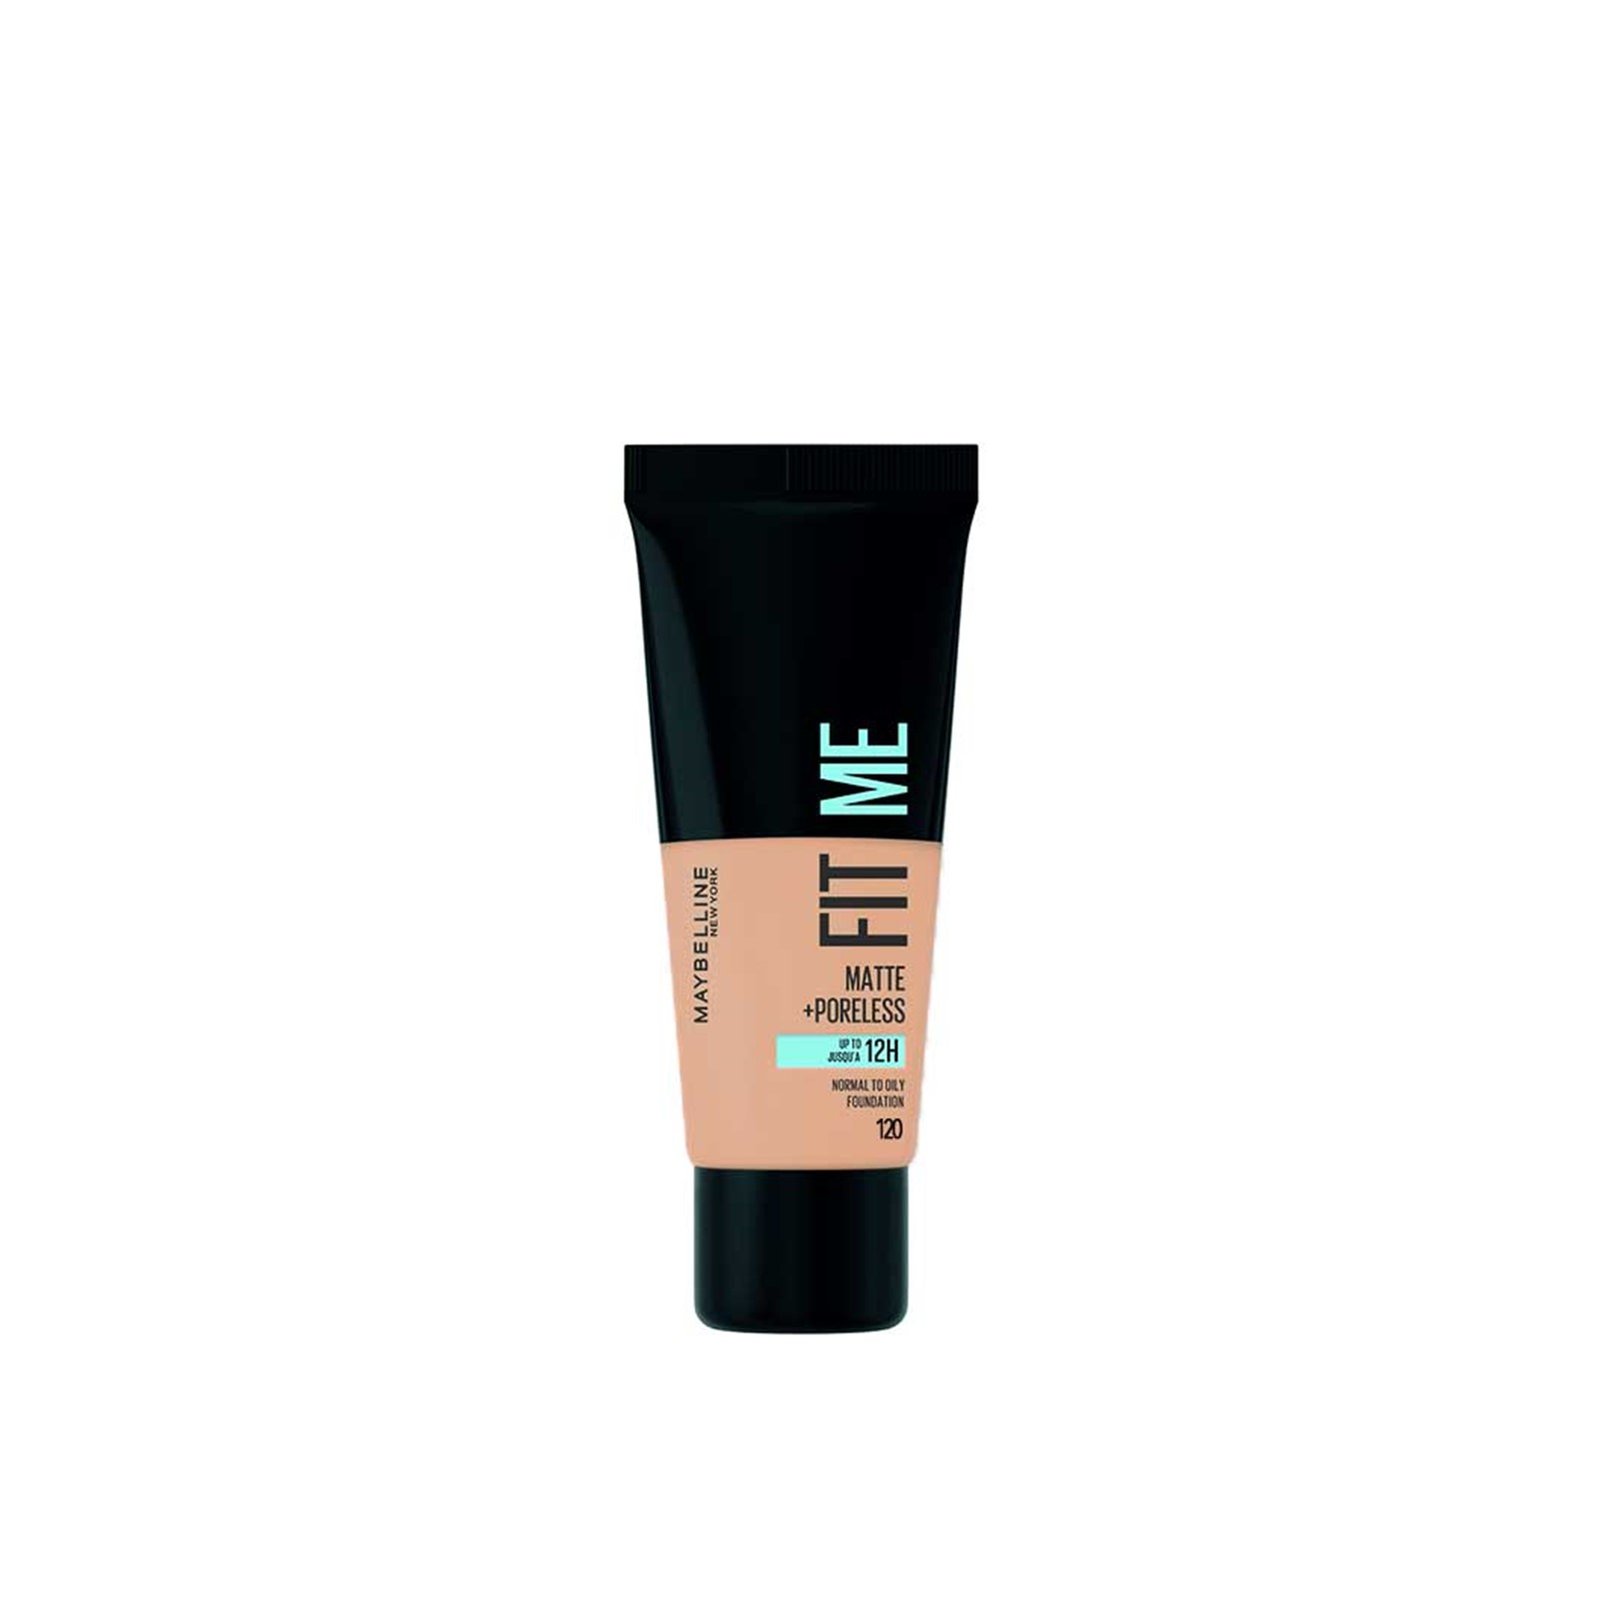 Maybelline Fit Me Matte & Poreless Foundation 120 Classic Ivory 30ml